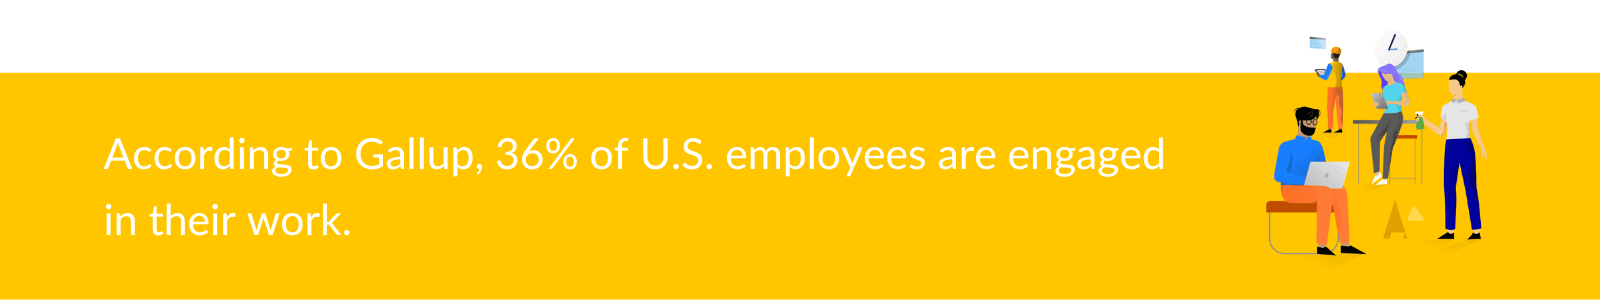 According to Gallup, 36% of U.S. employees are engaged in their work.